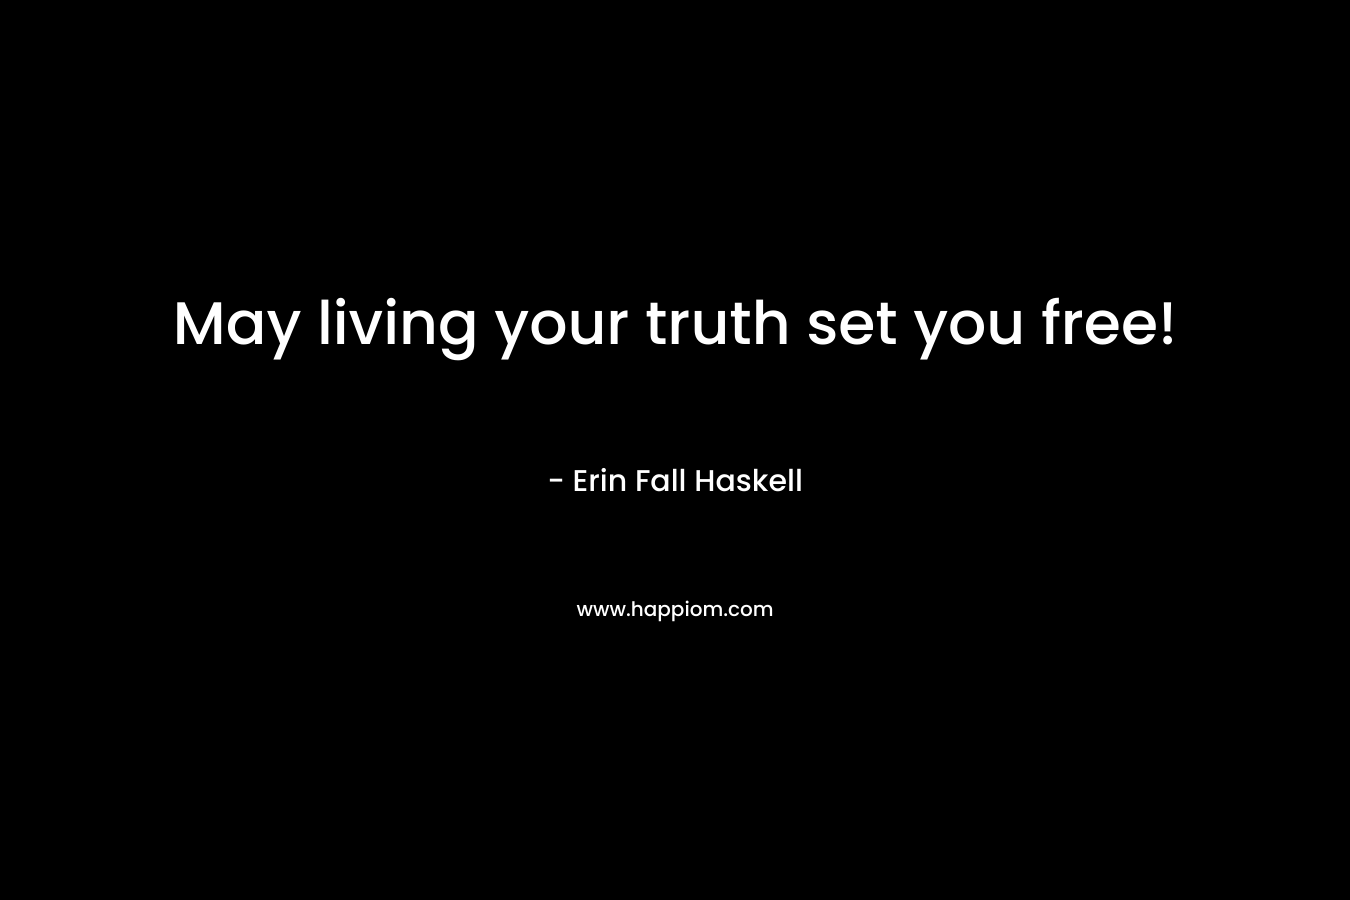 May living your truth set you free! – Erin Fall Haskell